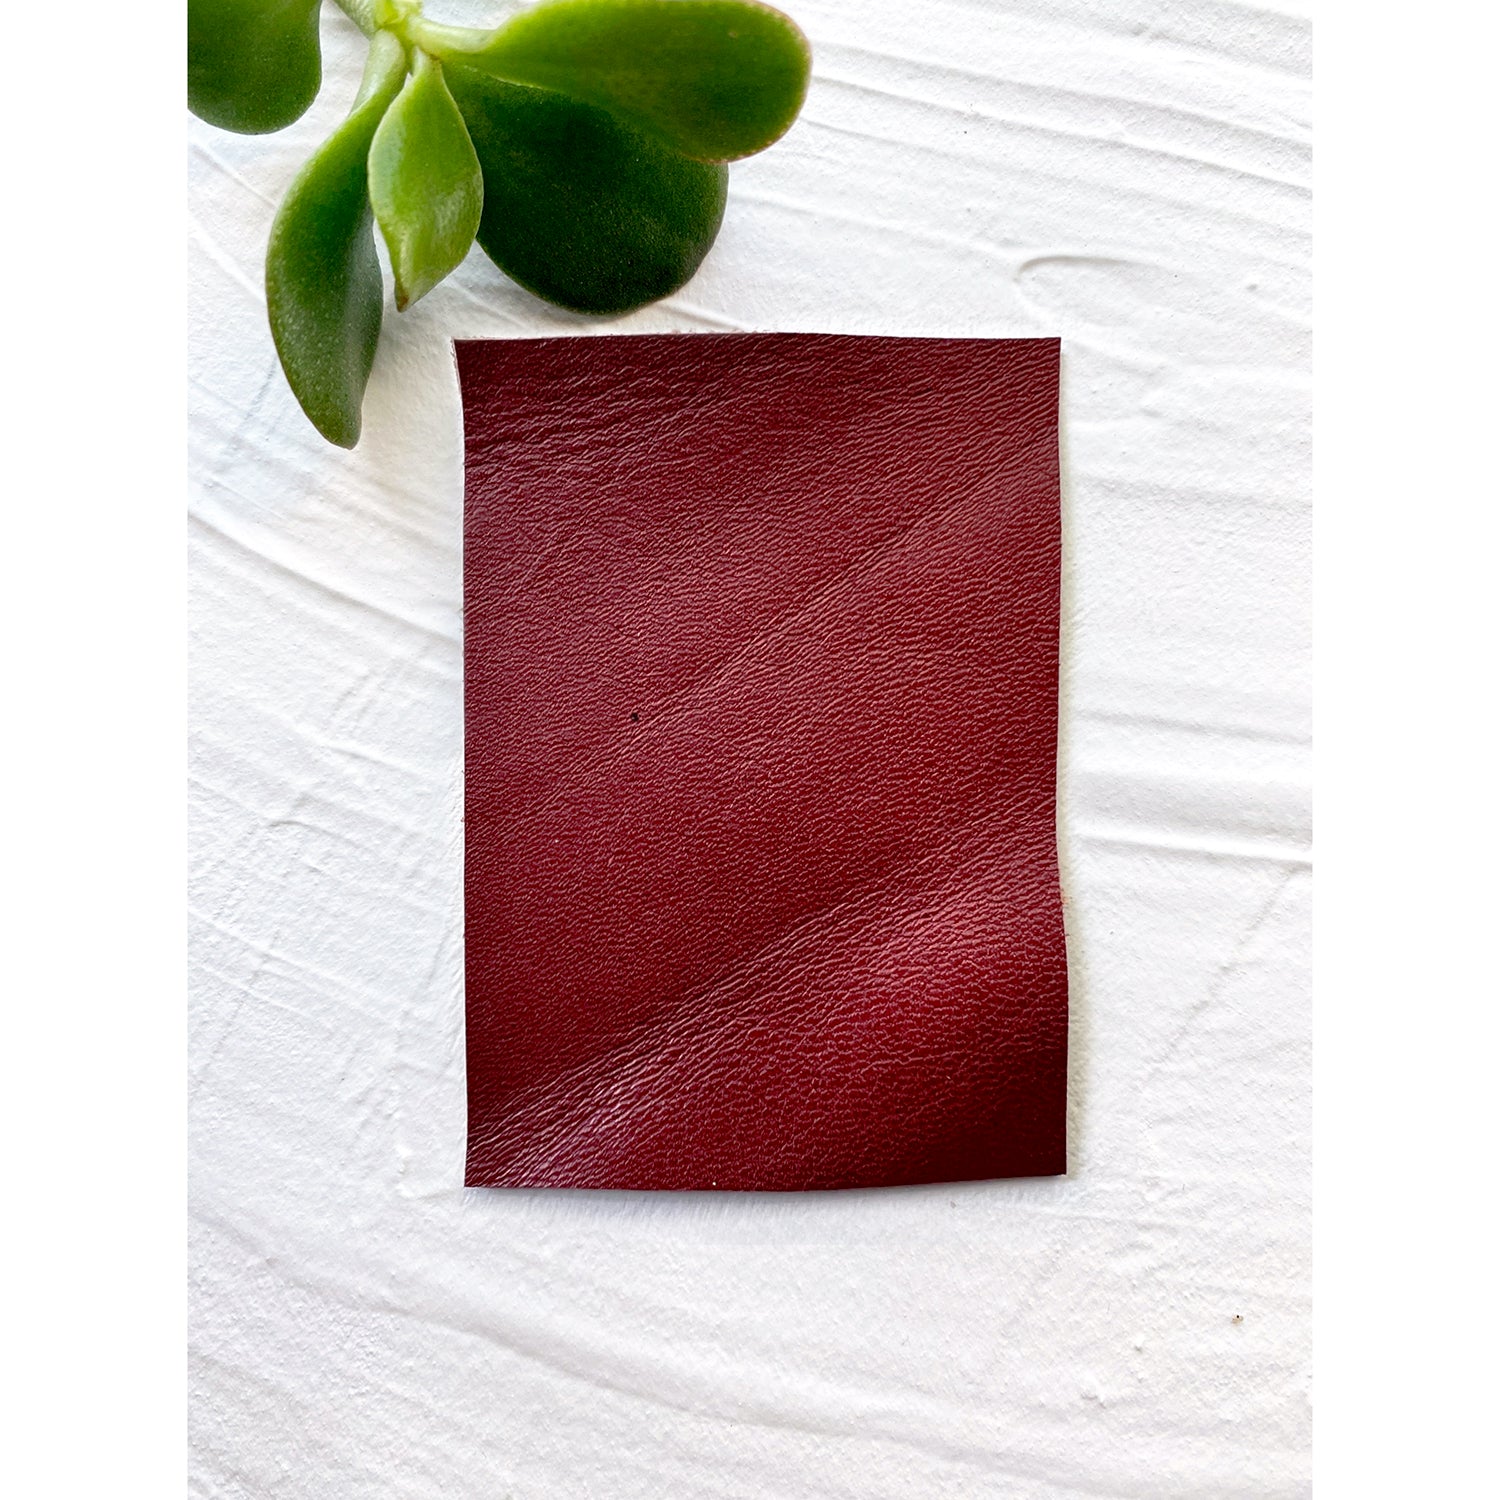 Merlot Classic Smooth Leather Swatch